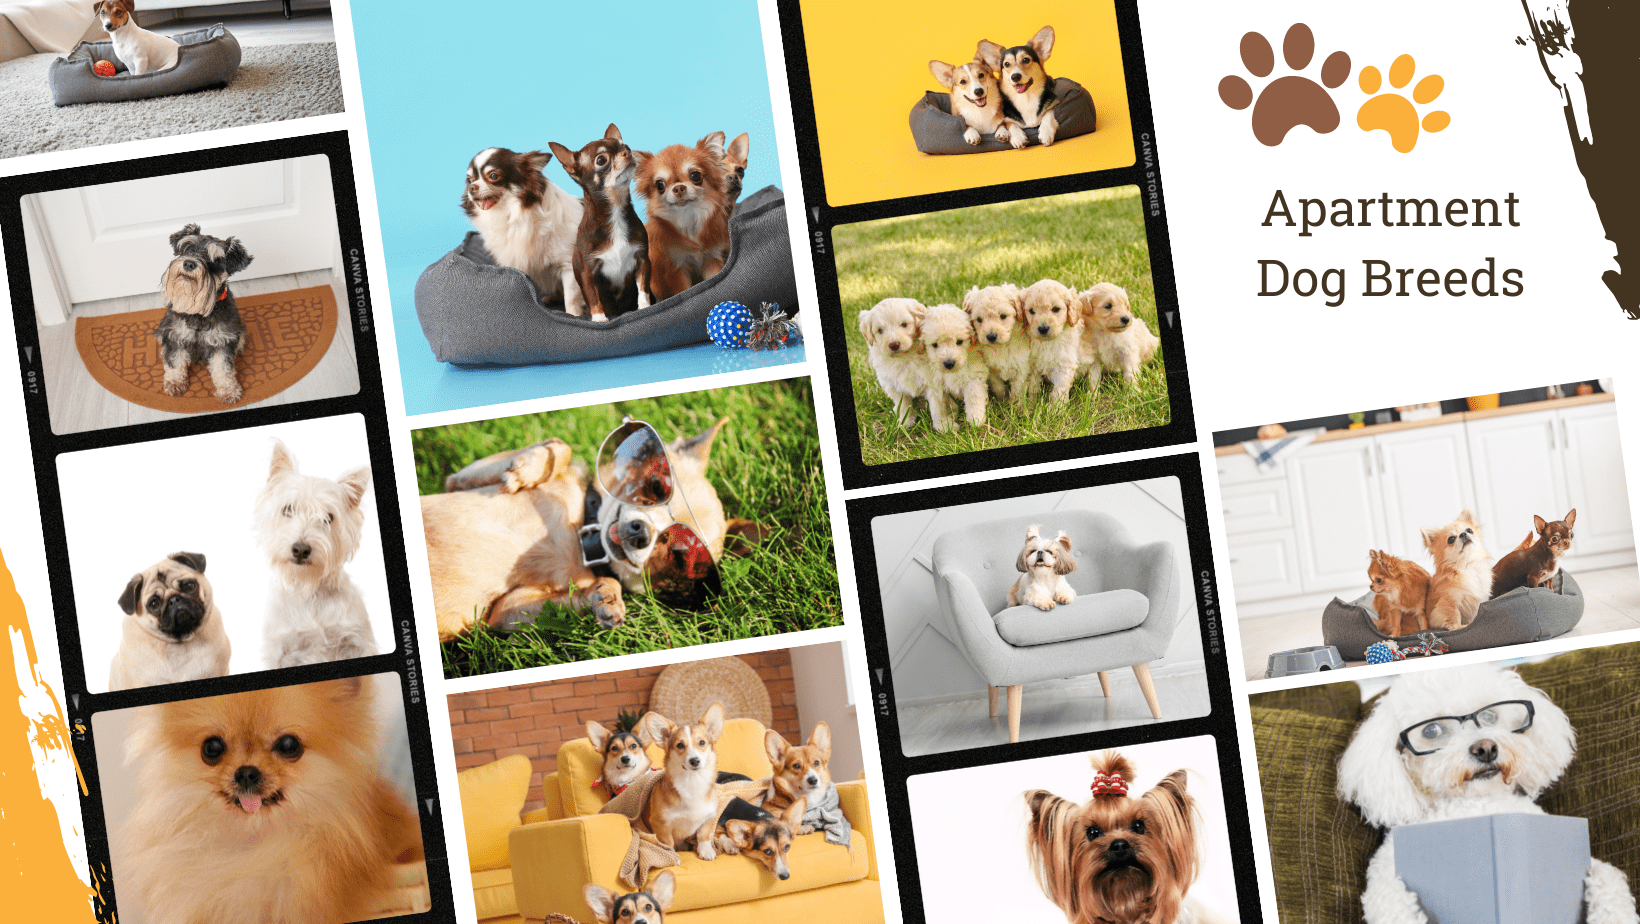 Dog Breed Archive - Best Dog Breeds for Apartments